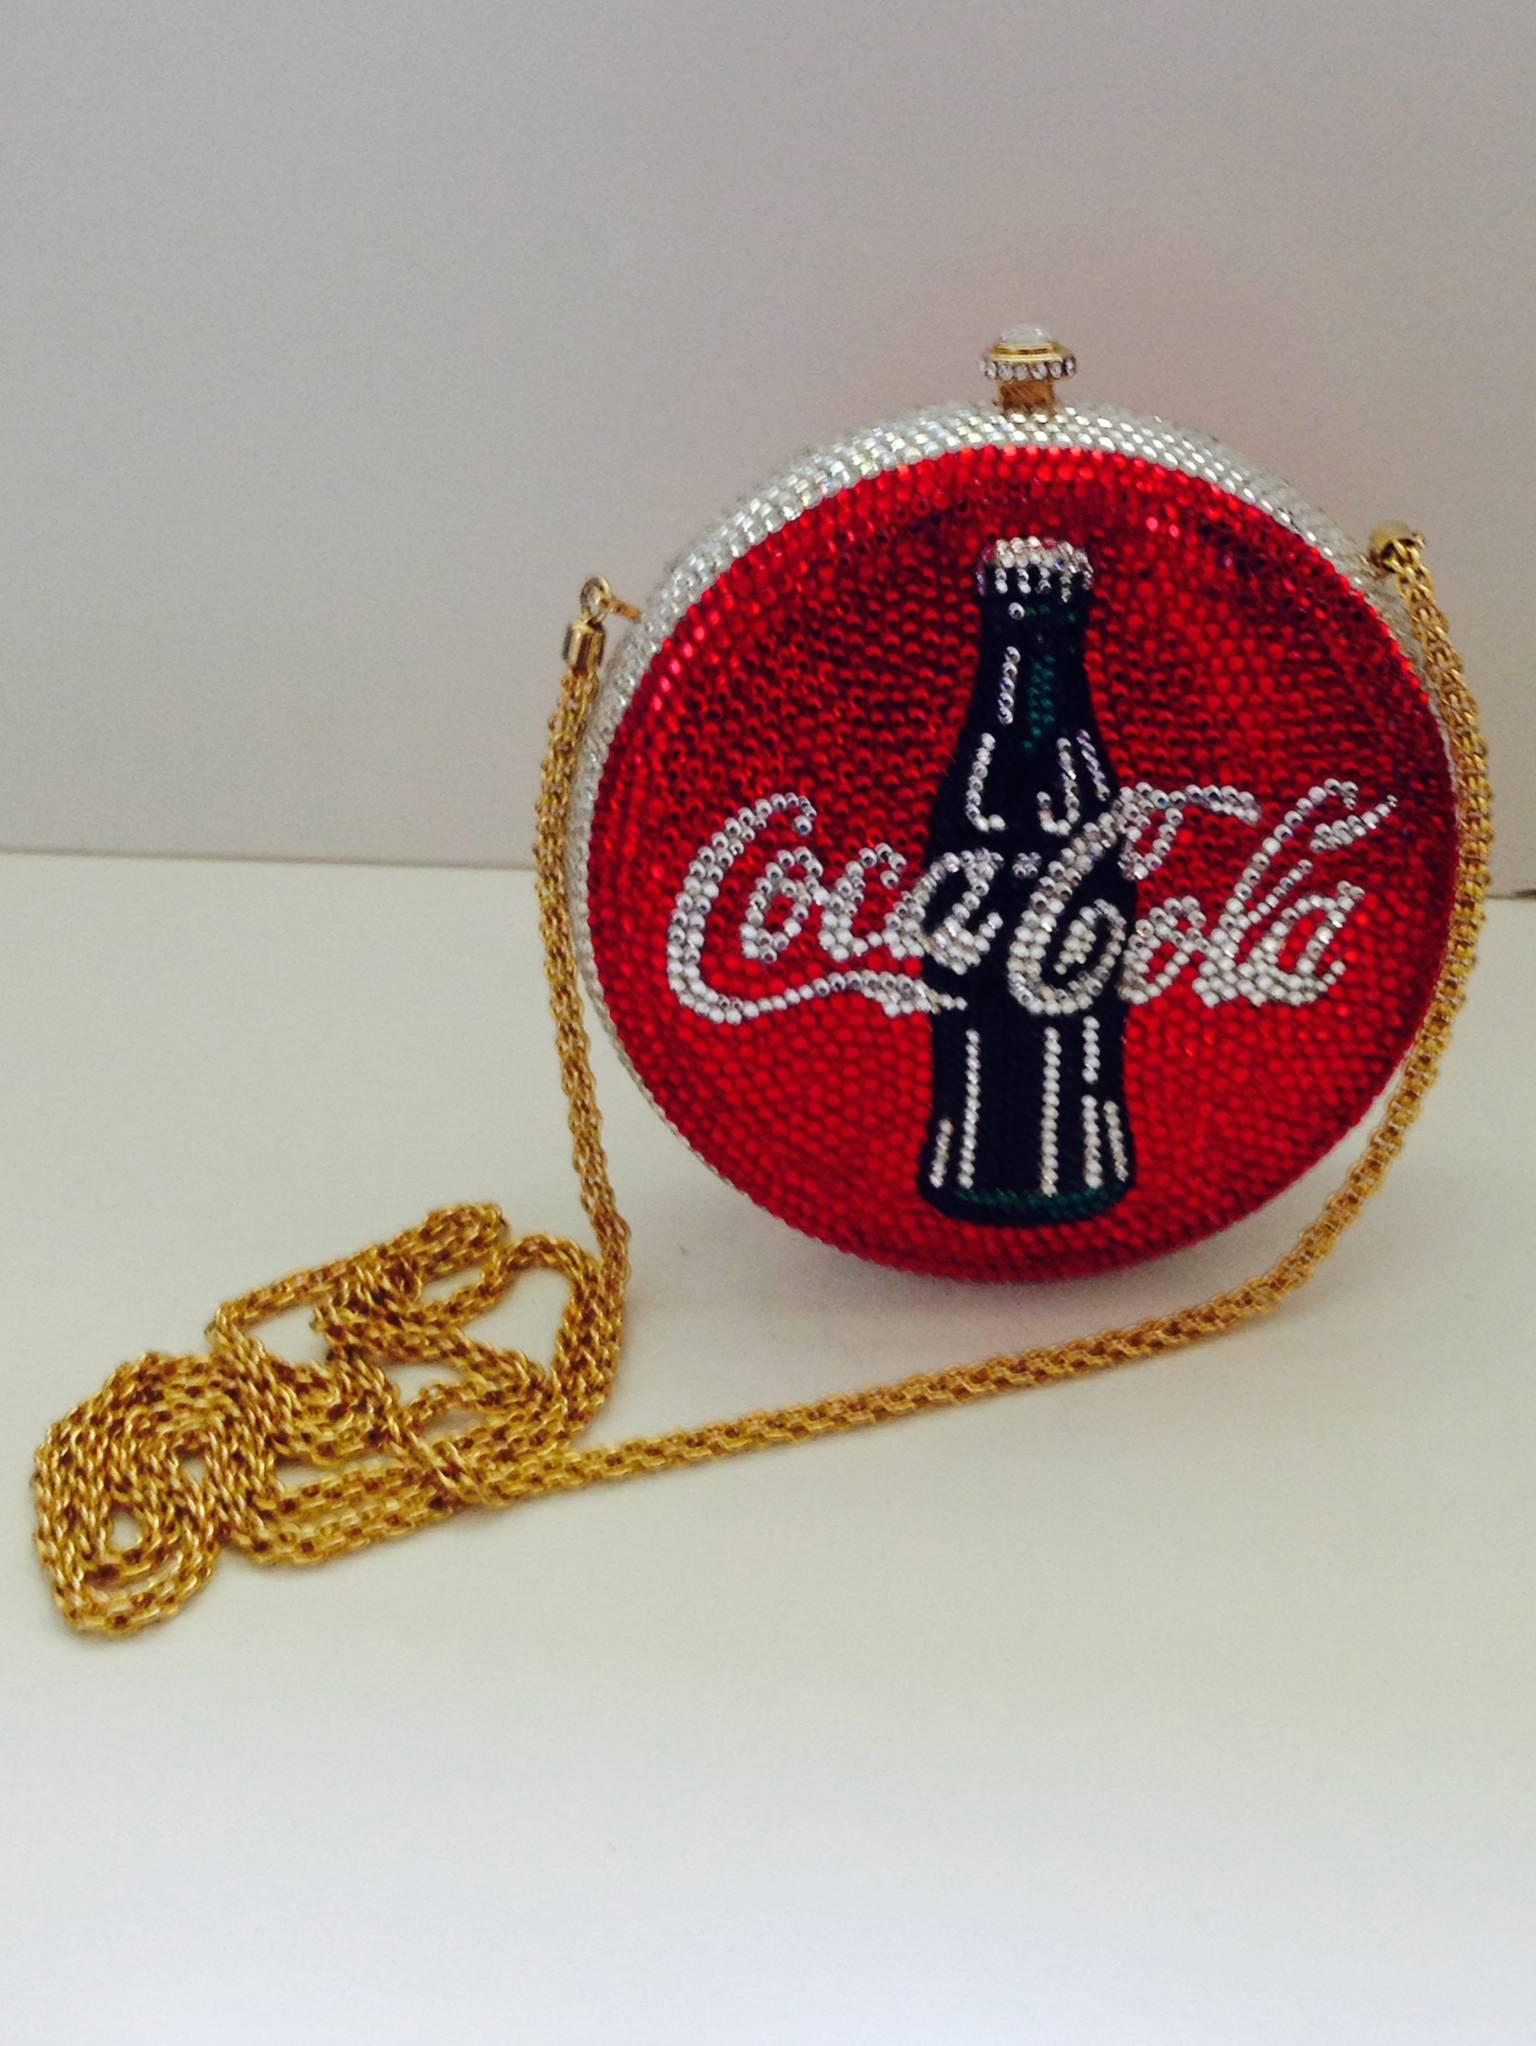 Limited Edition signed & numbered Katherin Baumann encrusted Swarovski crystal and gold-plate metal base Coca-Cola bottle cap minaudière evening bag. This limited edition bag is numbered via a brass plaque located on the interior of the hard